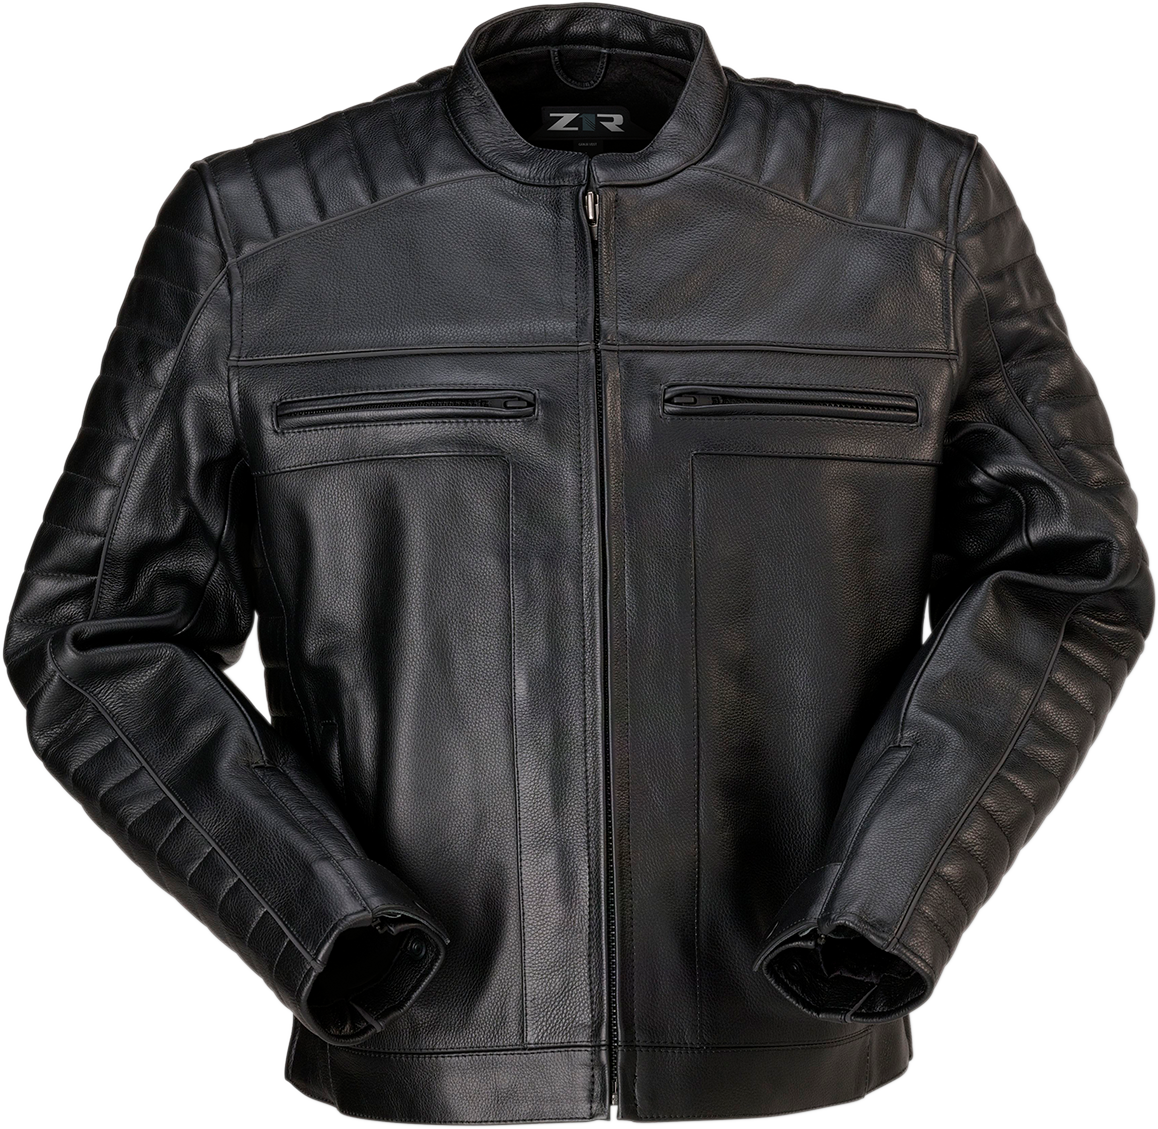 Z1R Artillery Mens Black Leather Motorcycle Riding Street Racing Jacket